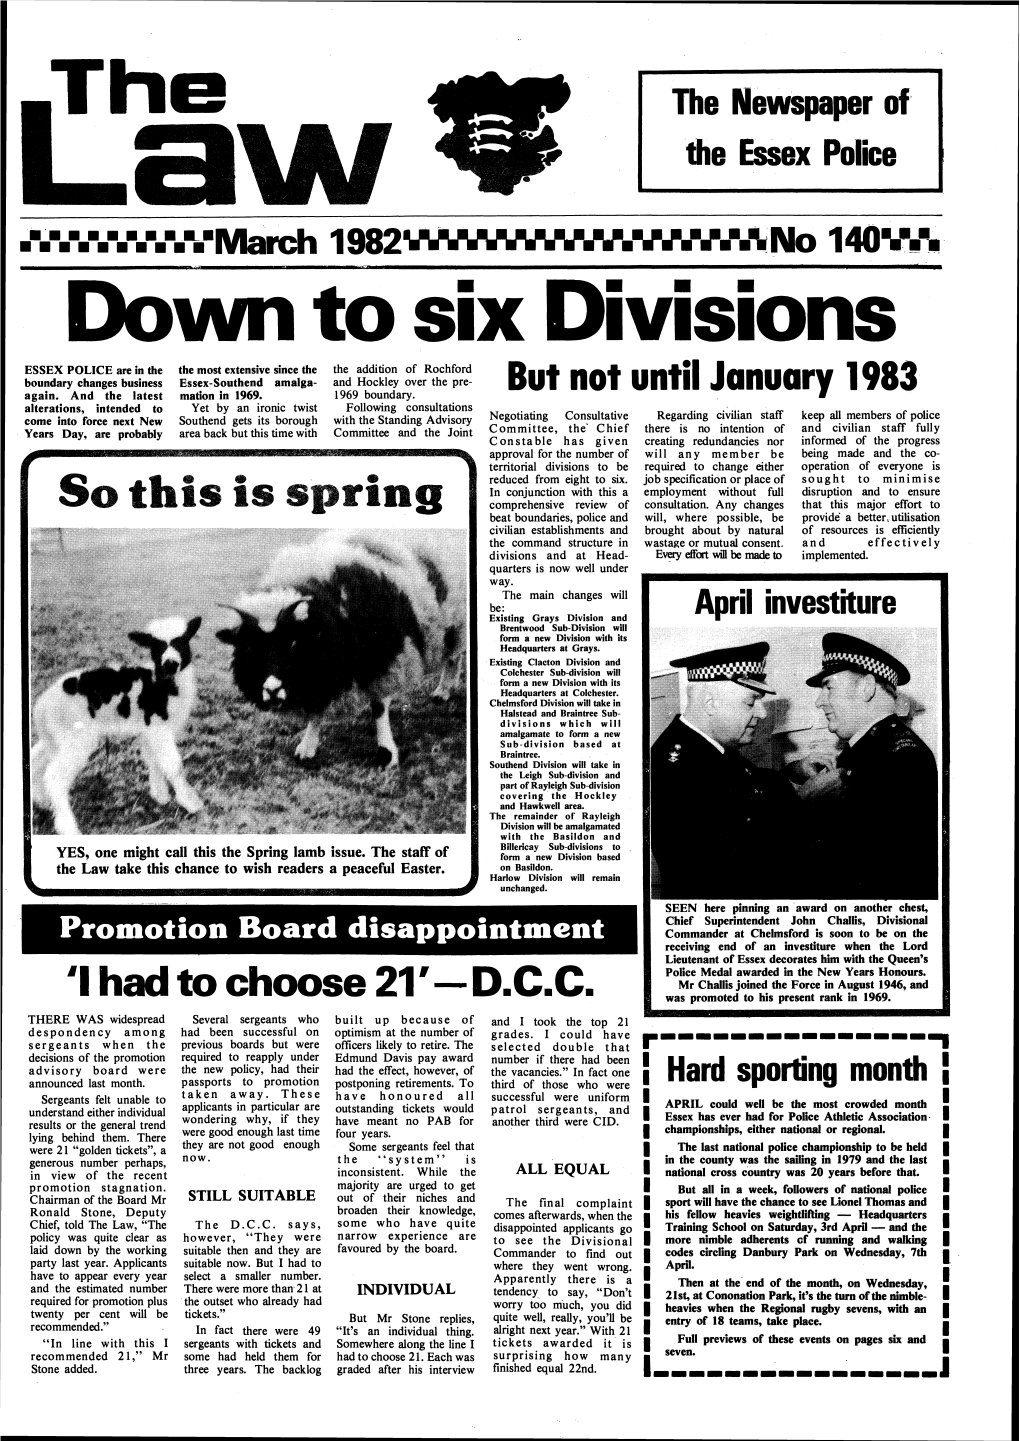 'I Had to Choose 21'-D.C.C. Was Promoted to His Present Rank in 1969